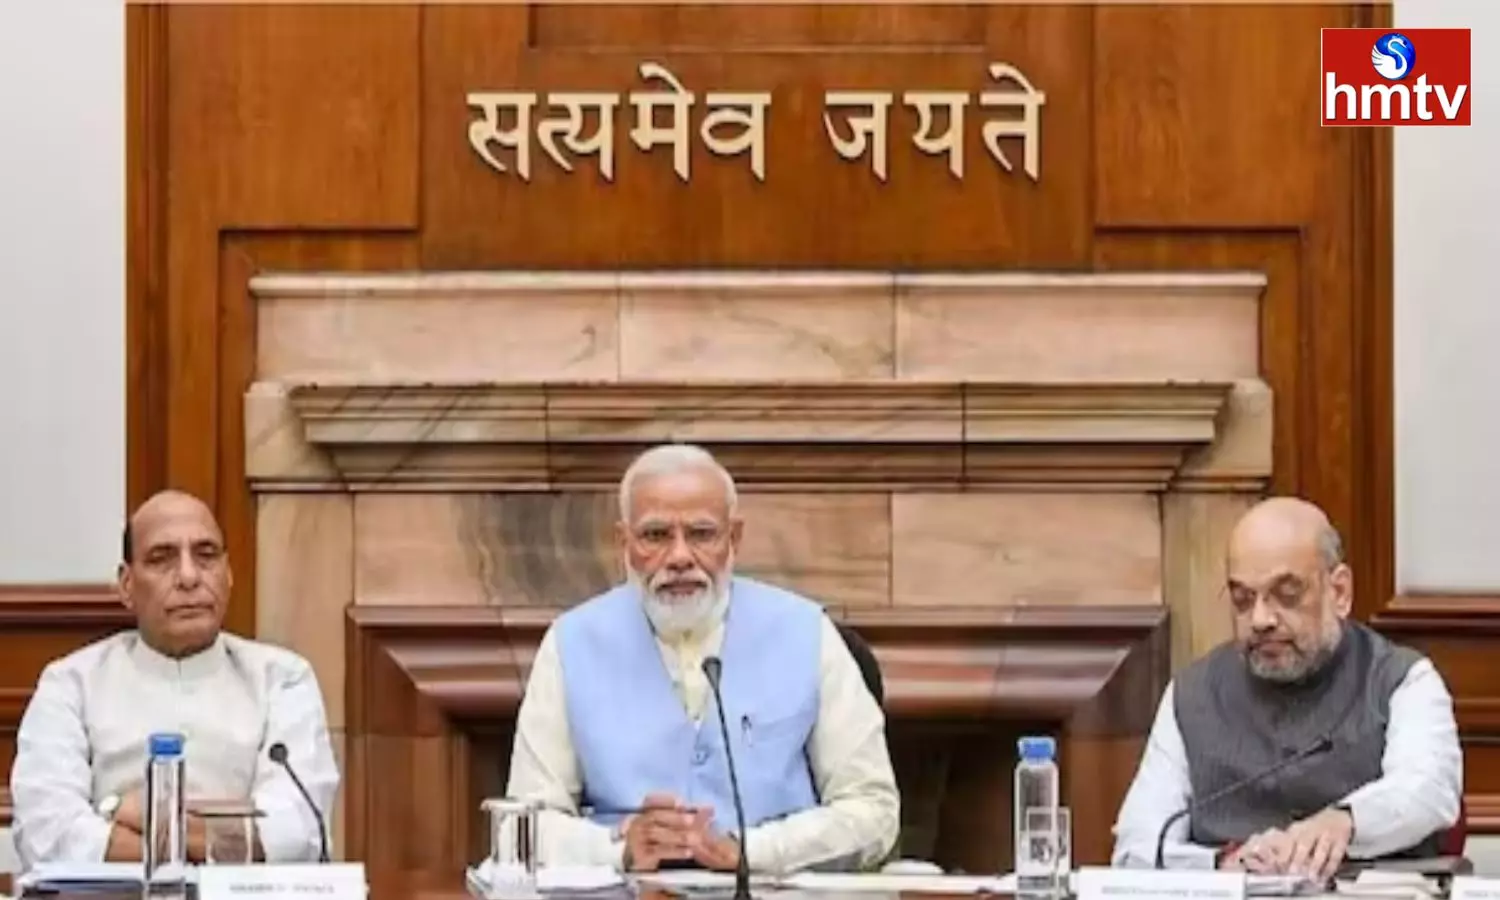 The Meeting Was Chaired By Modi In The Parliament Building